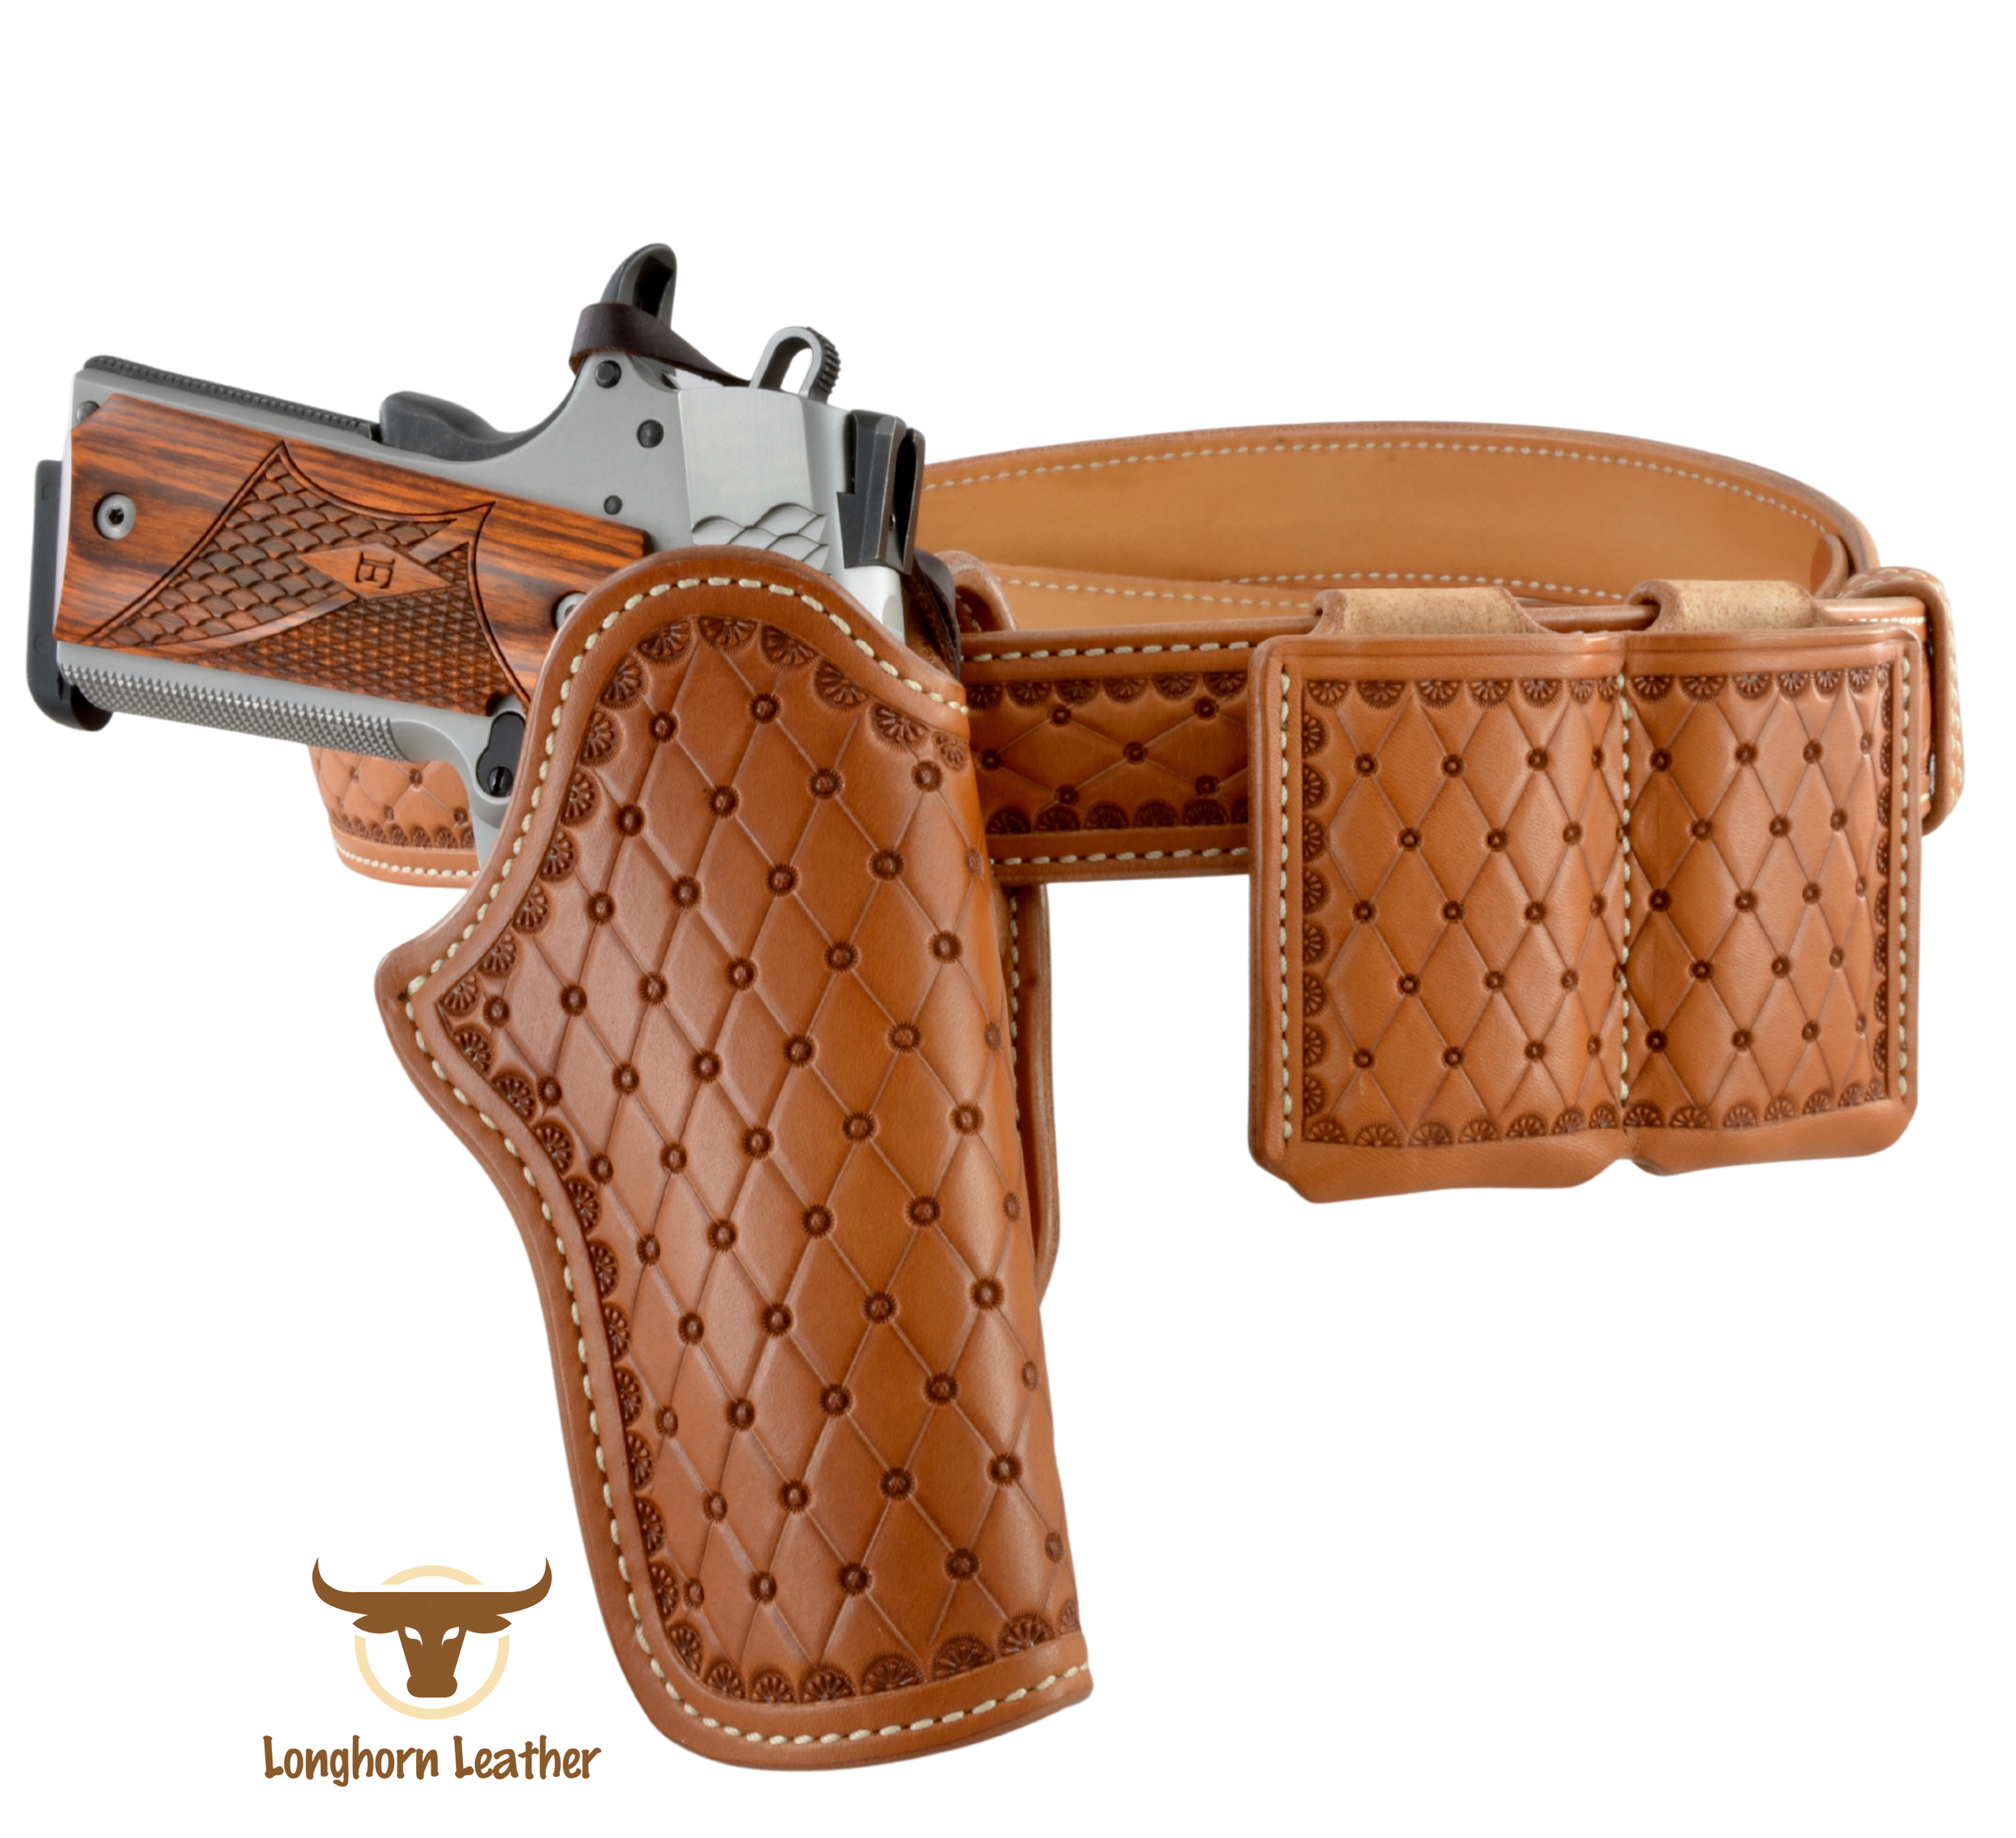 Custom leather 1911 holster, gun belt and magazine carrier featuring the “San Carlos” design.  Individually handcrafted at Longhorn Leather AZ.